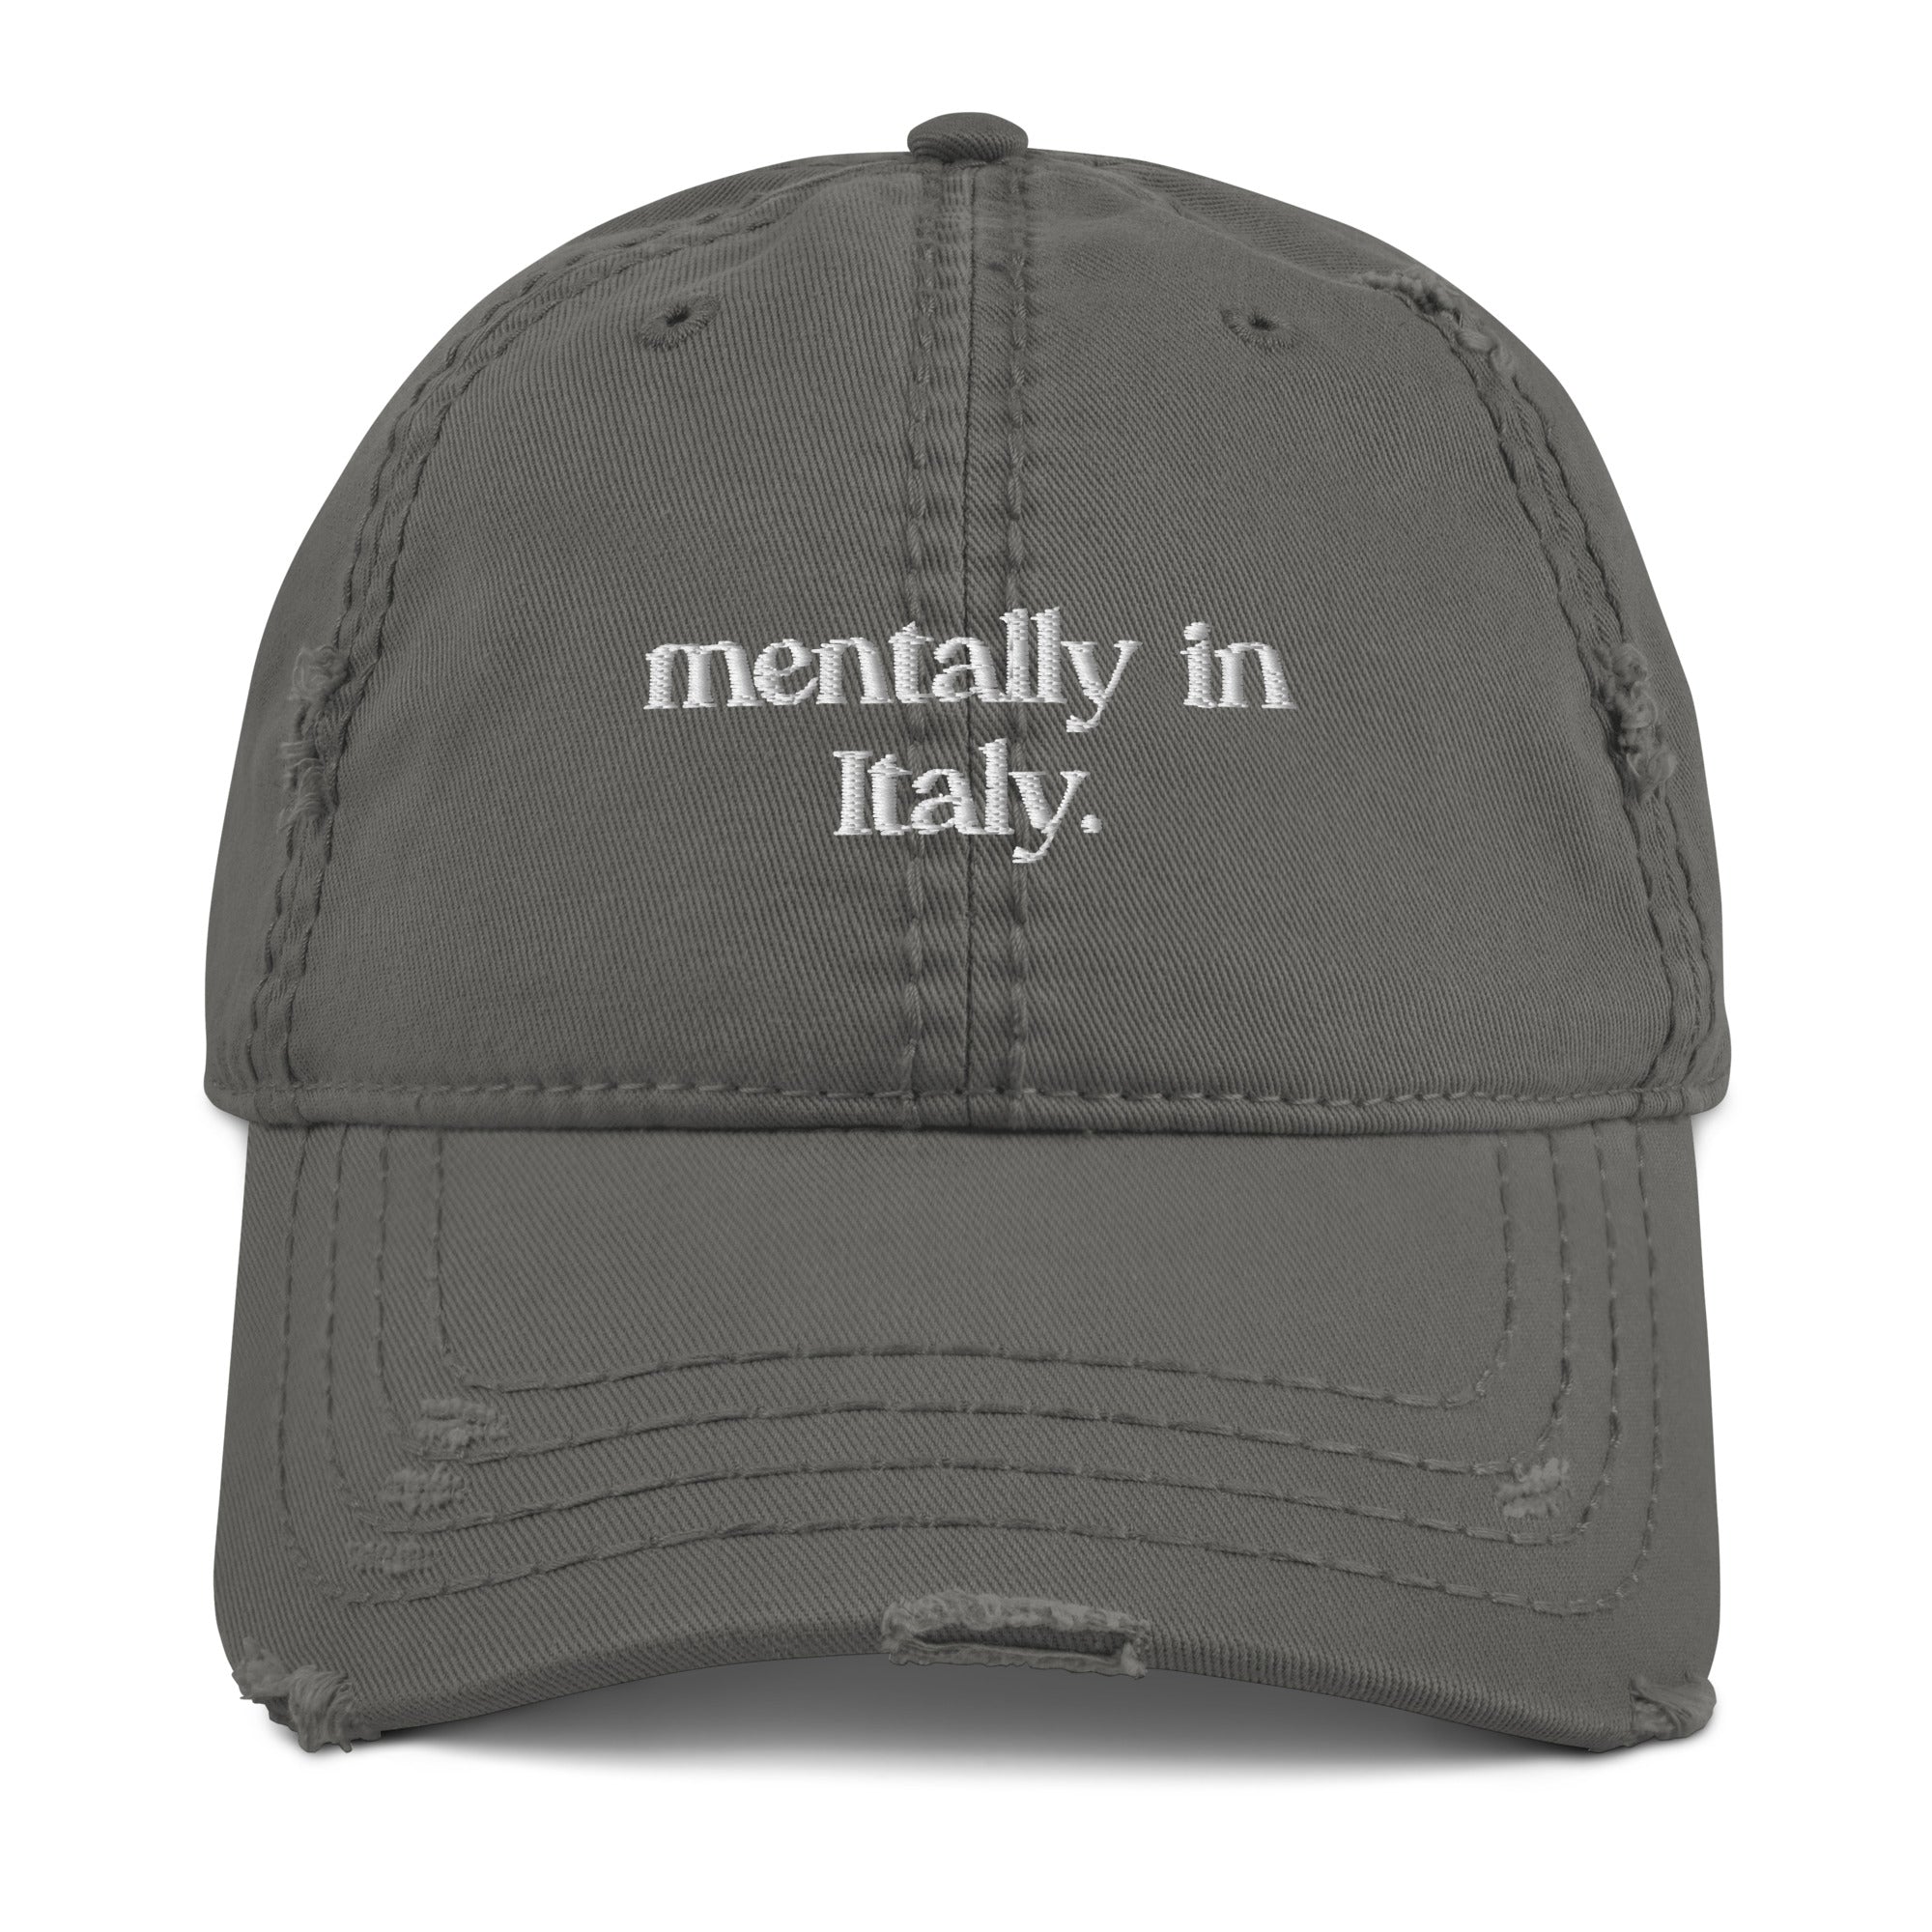 Mentally in Italy - Distressed Dad Hat